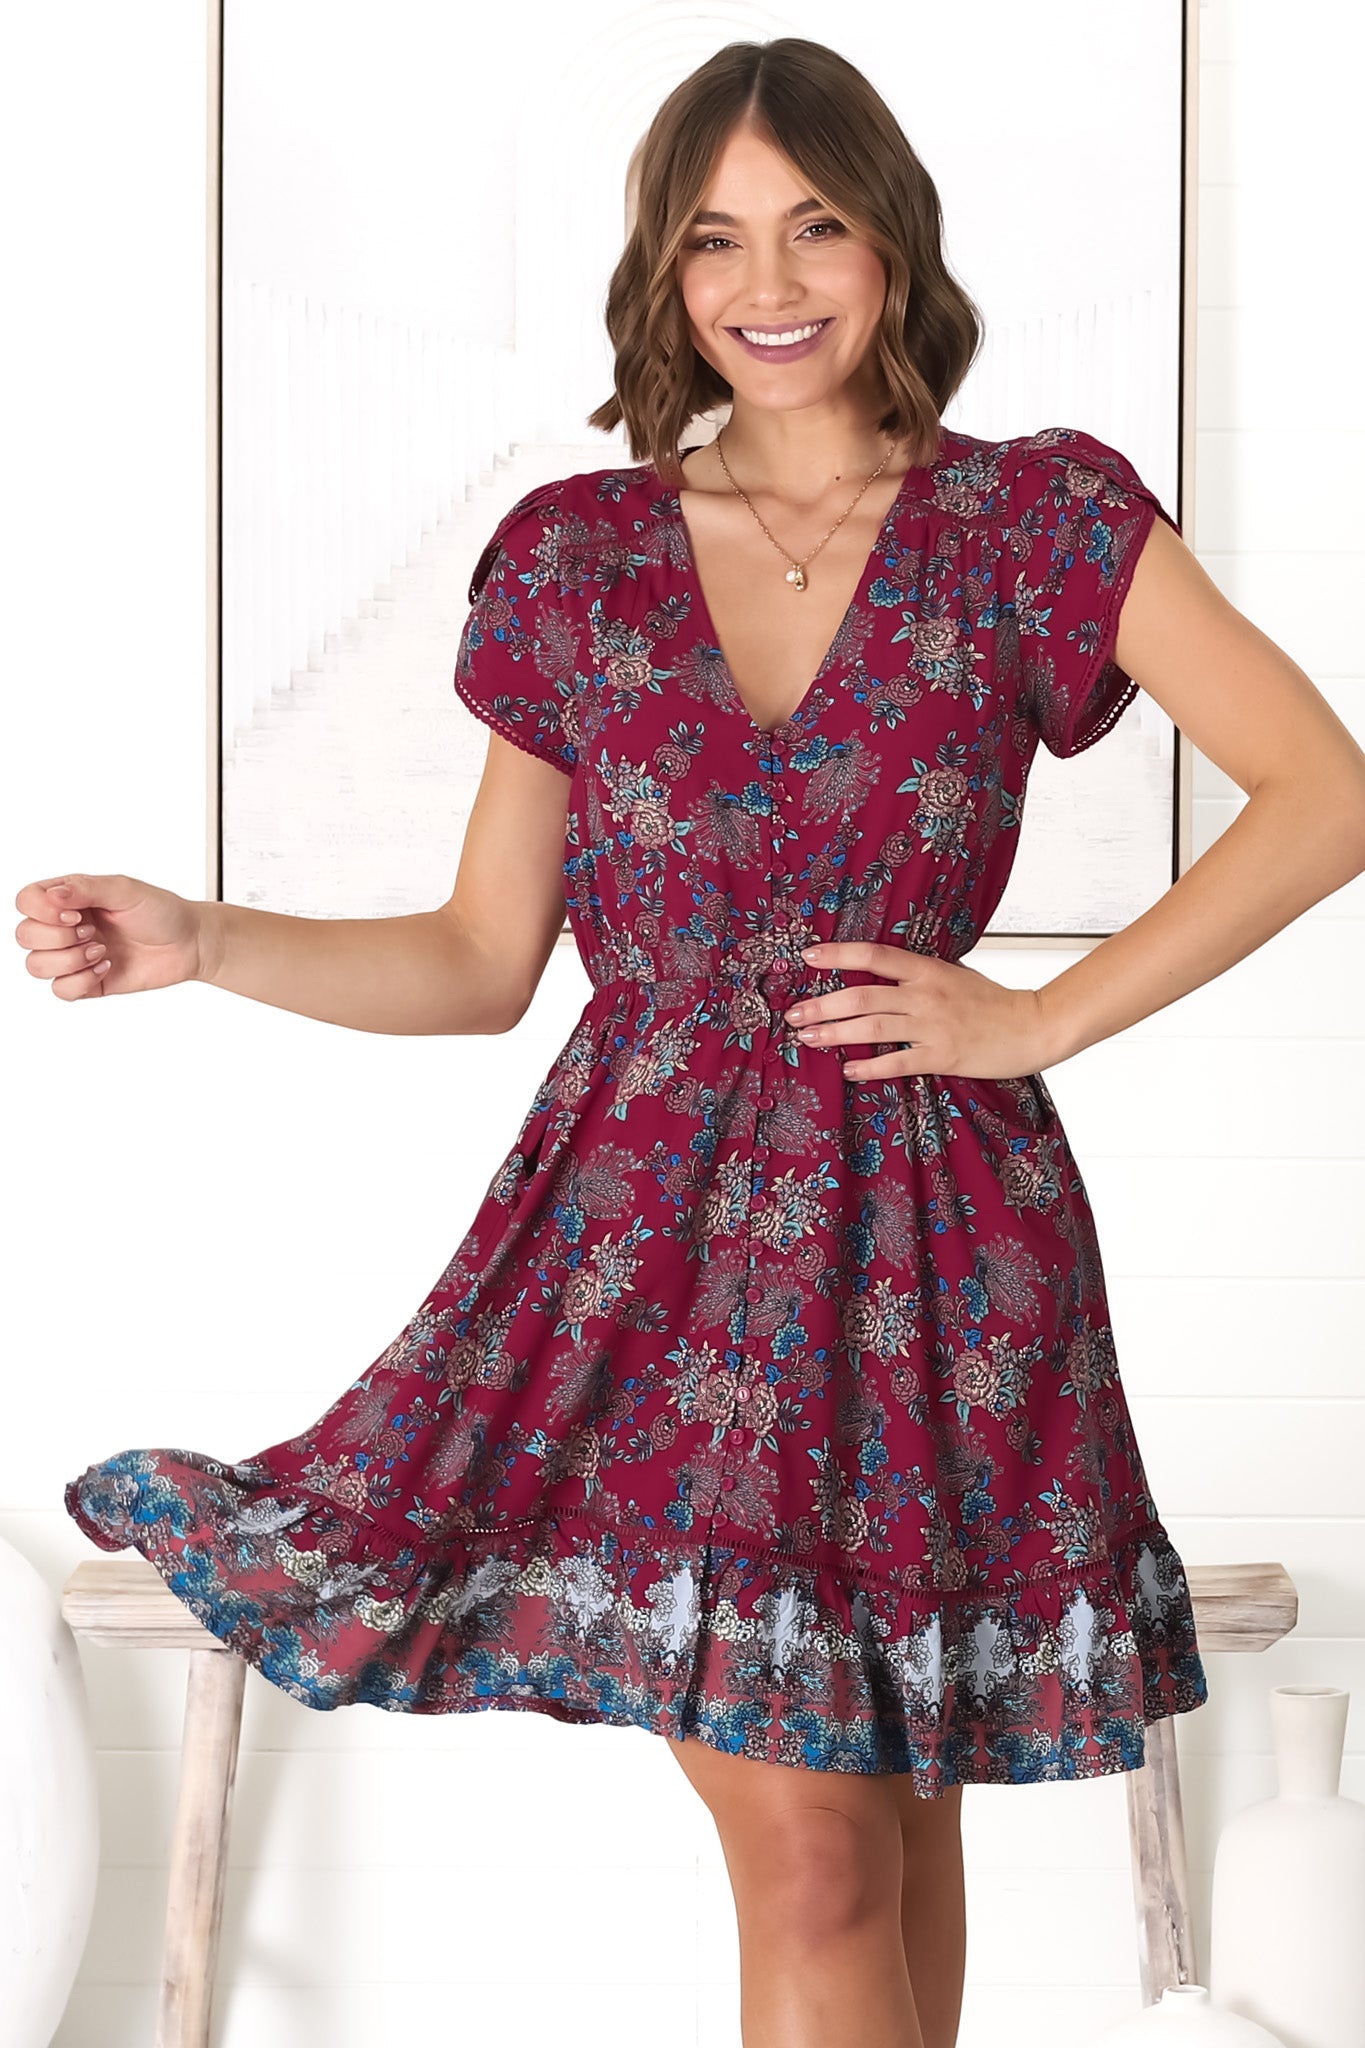 JAASE - Lizzie Mini Dress: Butterfly Cap Sleeve Button Down Dress with Pockets in Strawberry Kiss Print